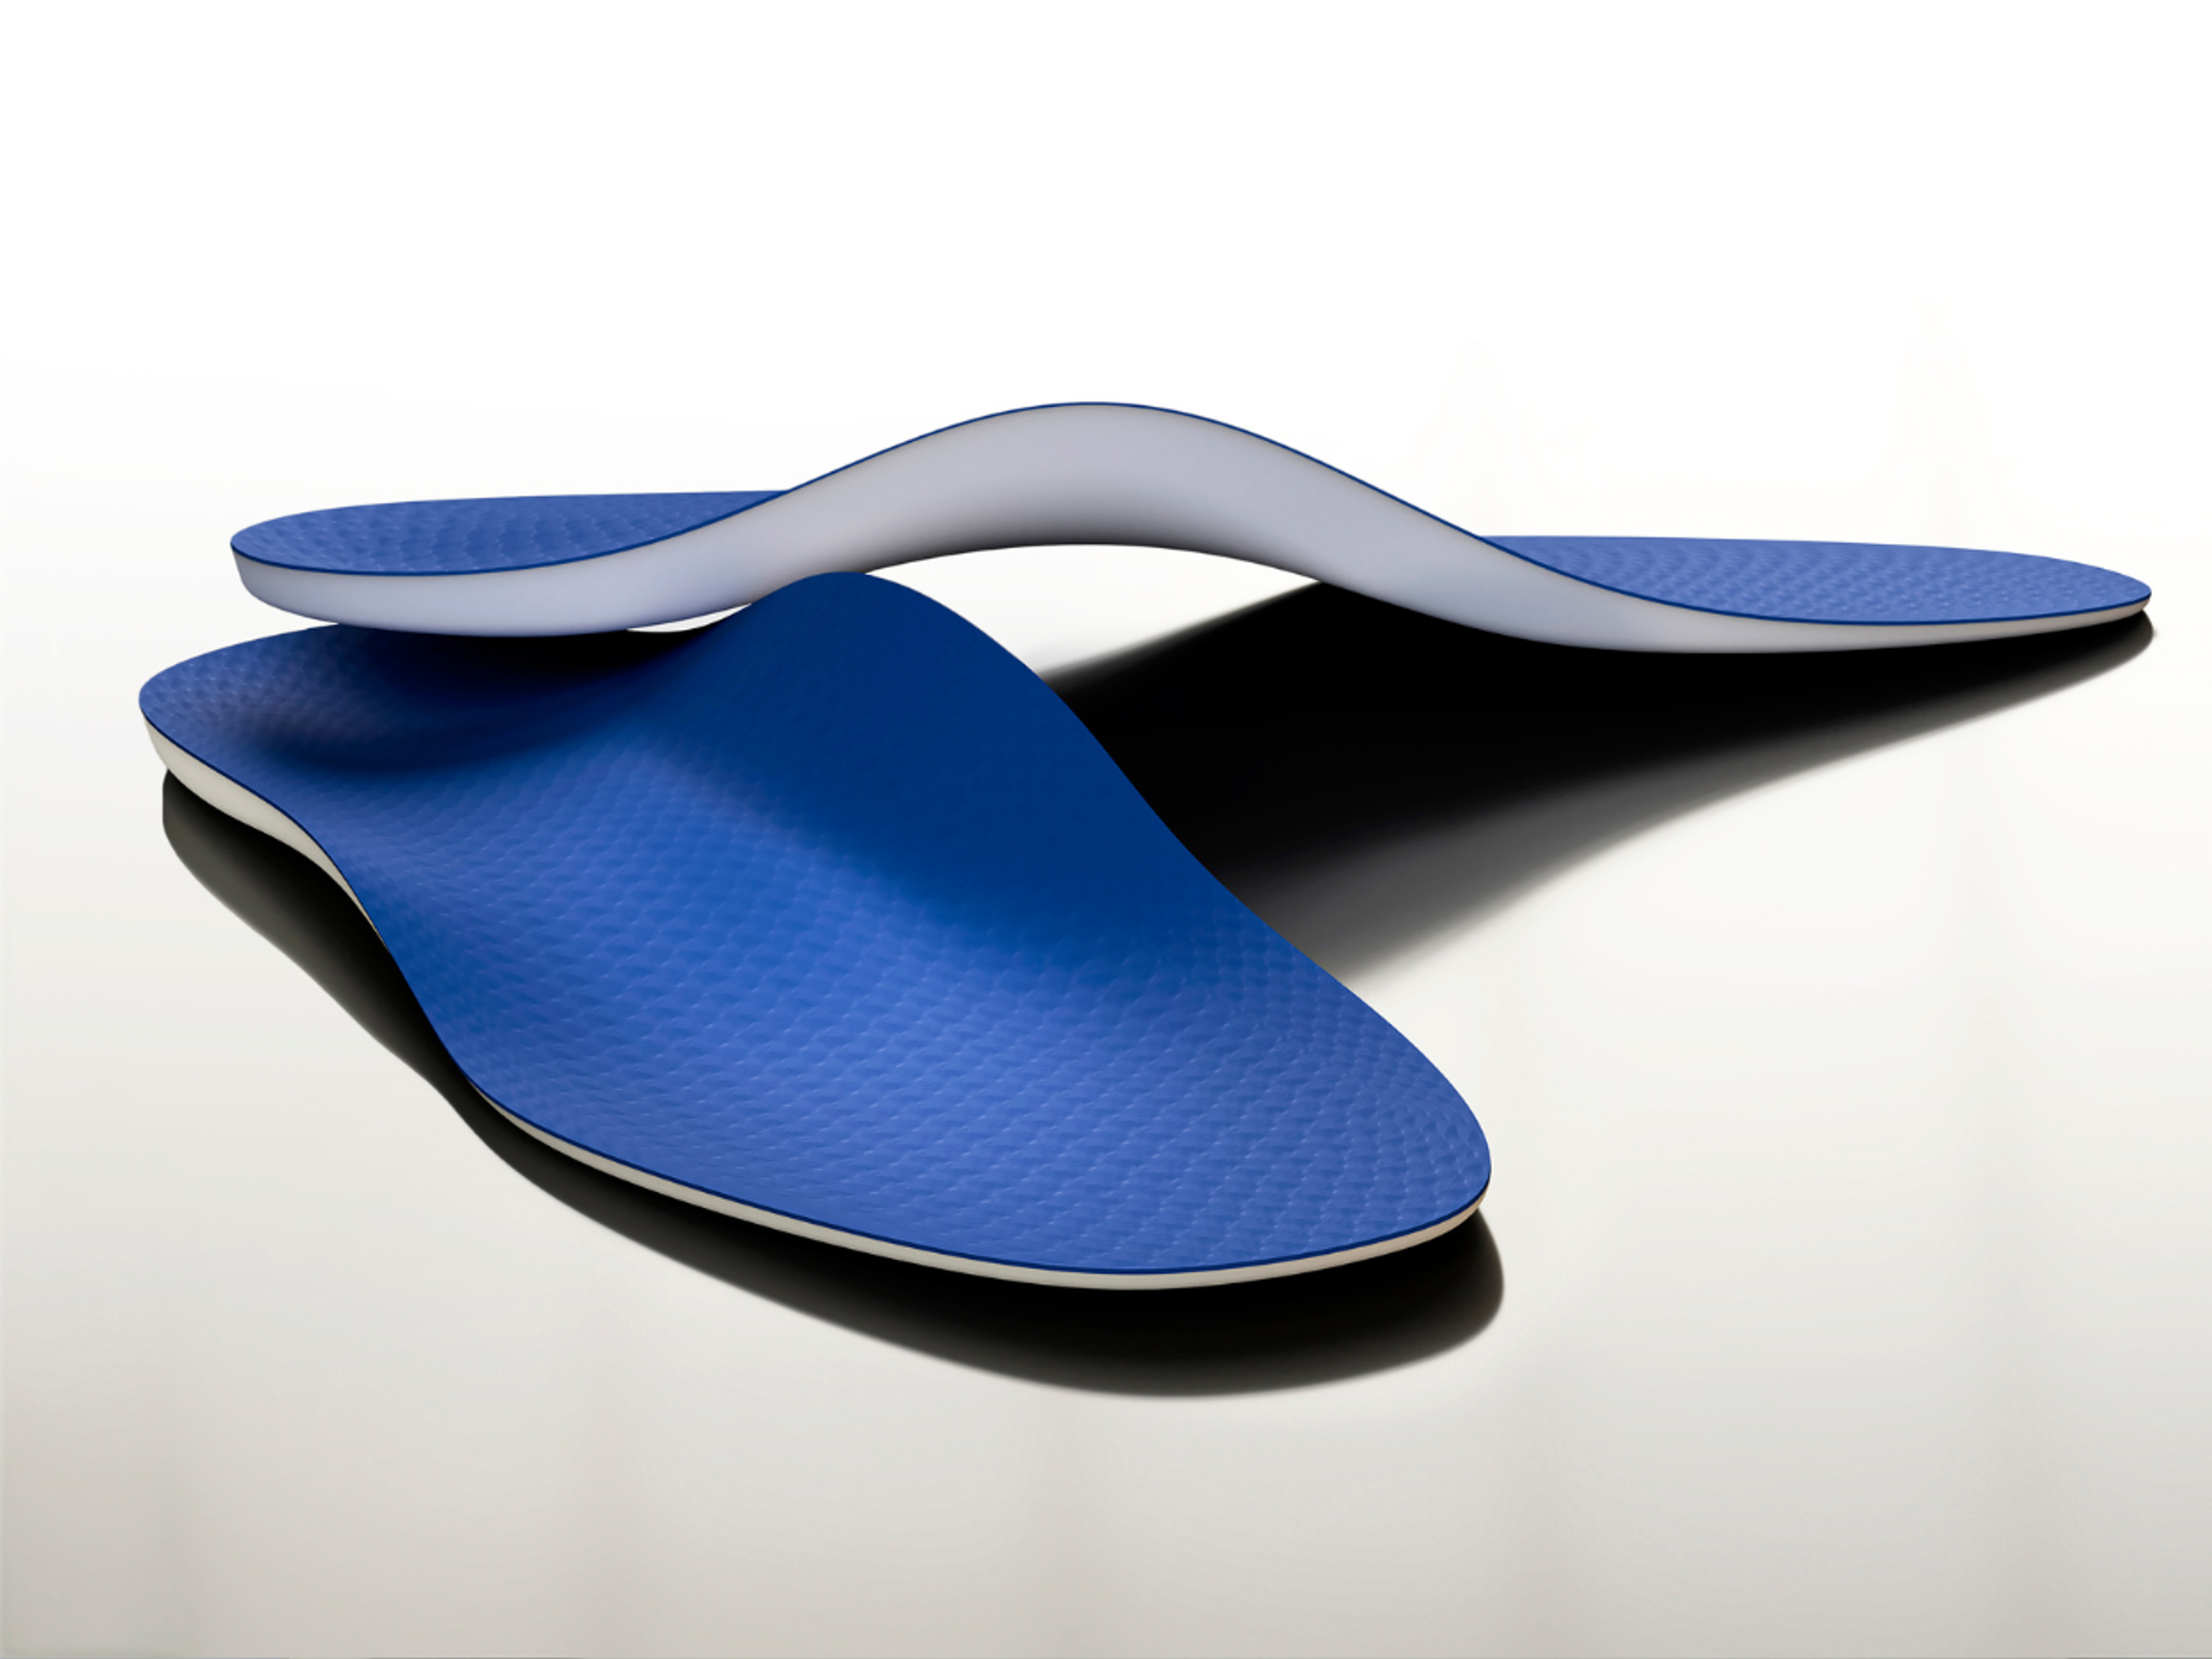 Off-the-shelf insoles come in different heights of arch support. It's usually best to choose one that closely resembles your arch height.